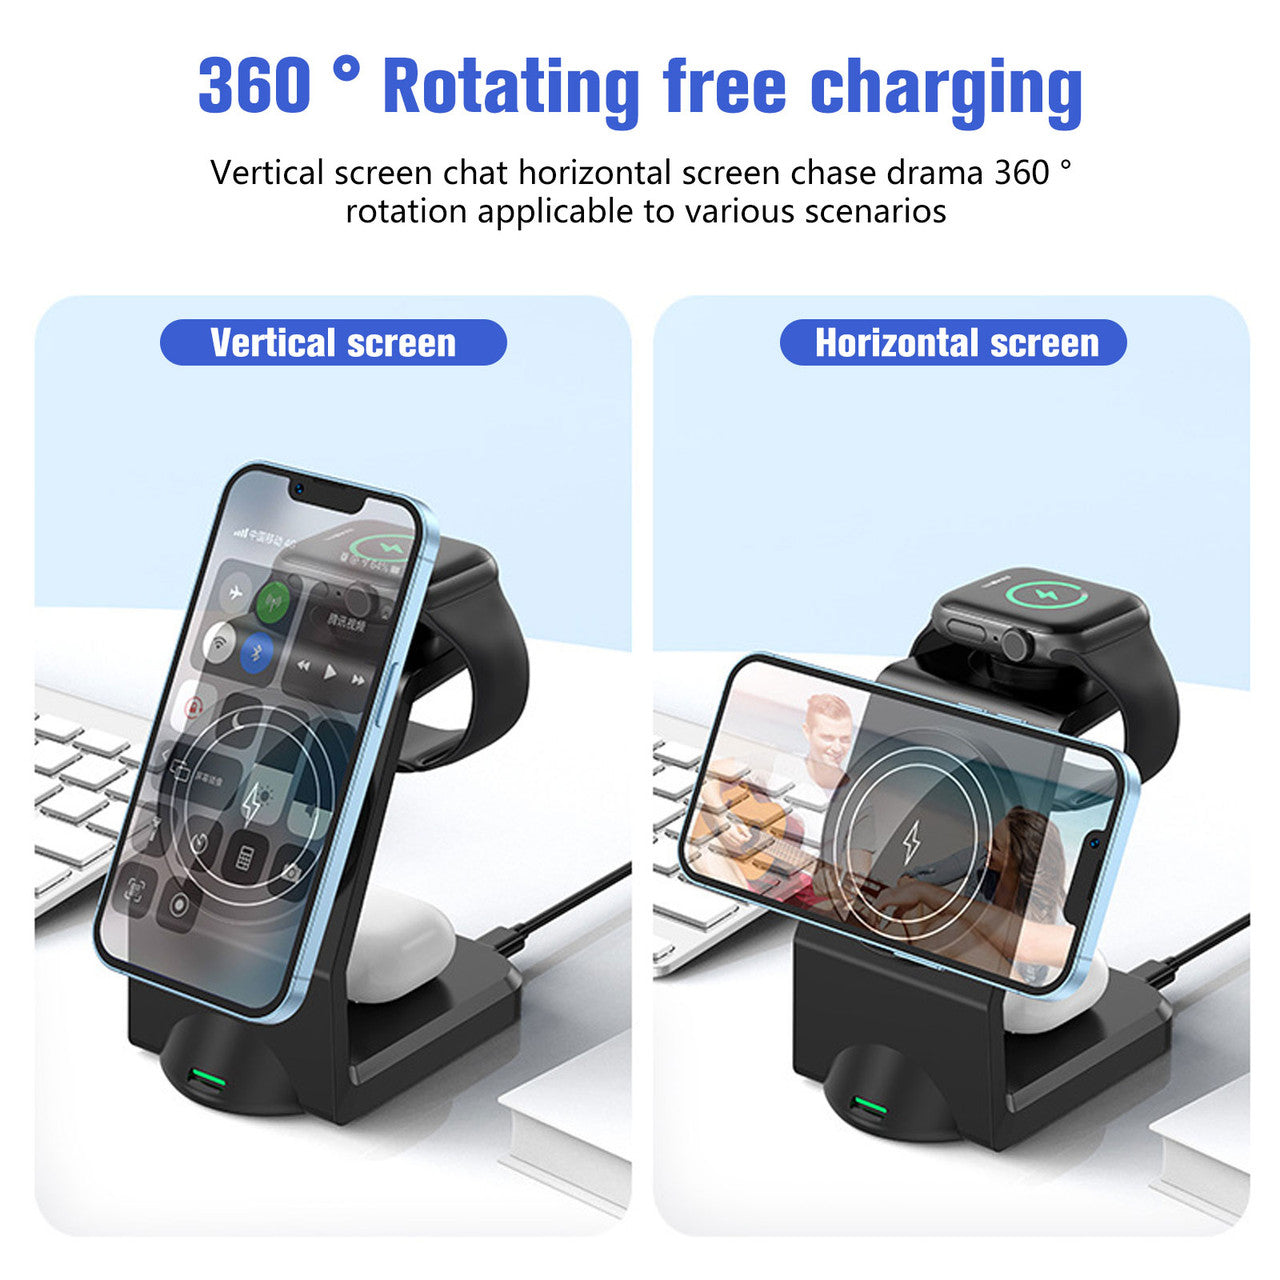 3-IN-1 Wireless Charging Dock - Magnetic Foldable Charging Pad Fast Wireless Charging Station Compatible